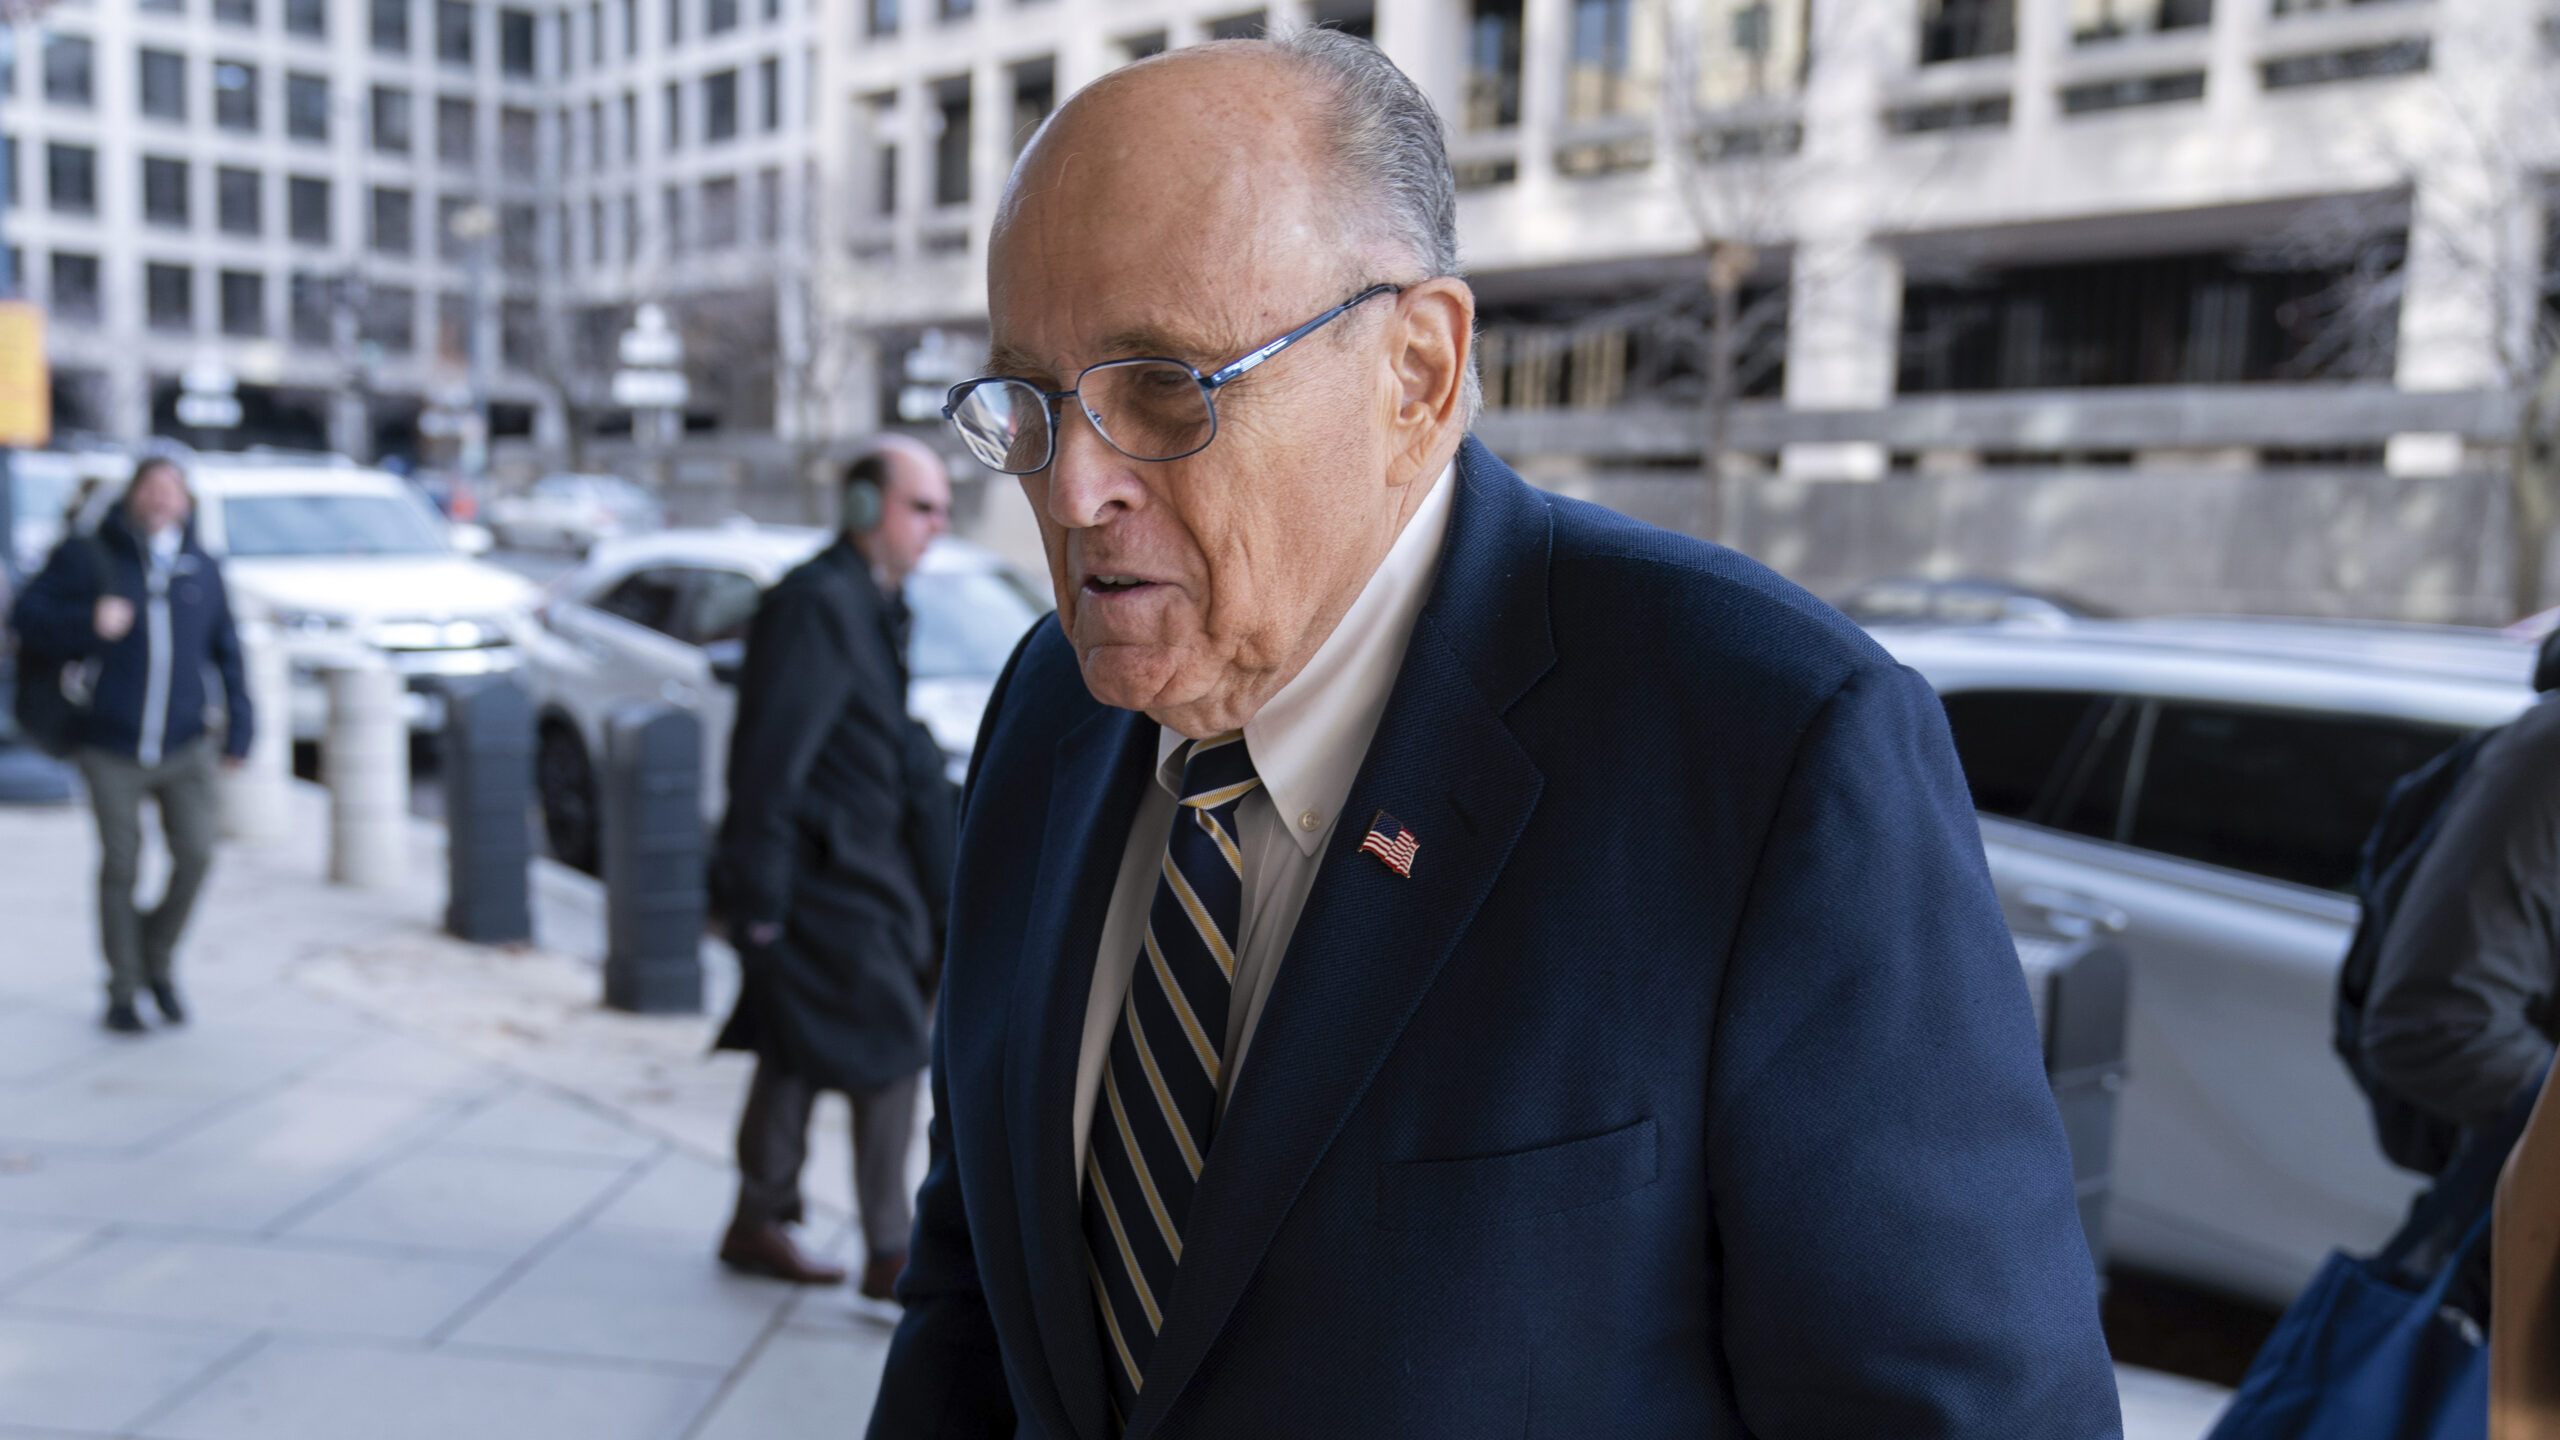 Rudy Giuliani arrives at the federal courthouse in Washington, D.C., on Wednesday for a trial to determine how much he